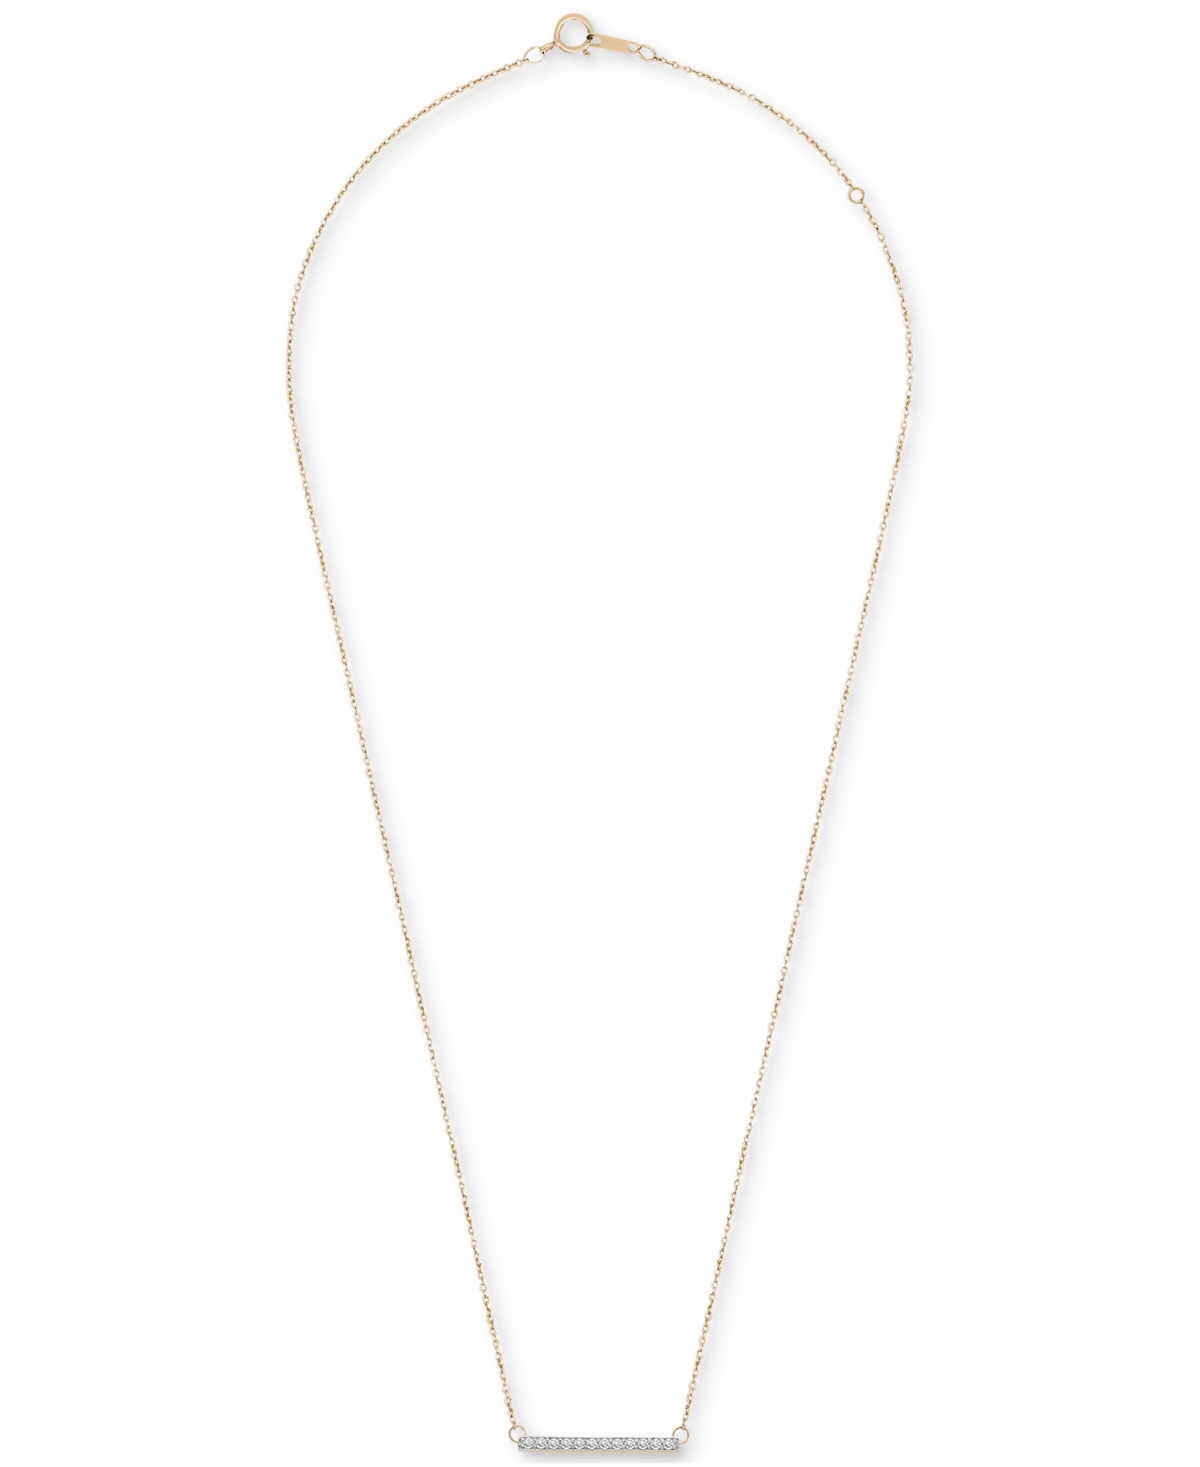 Wrapped Diamond Bar Pendant Necklace (1/6 Ct. T.w.) In 14k White Gold Or 14k Yellow Gold, 18" + 2" Extender,